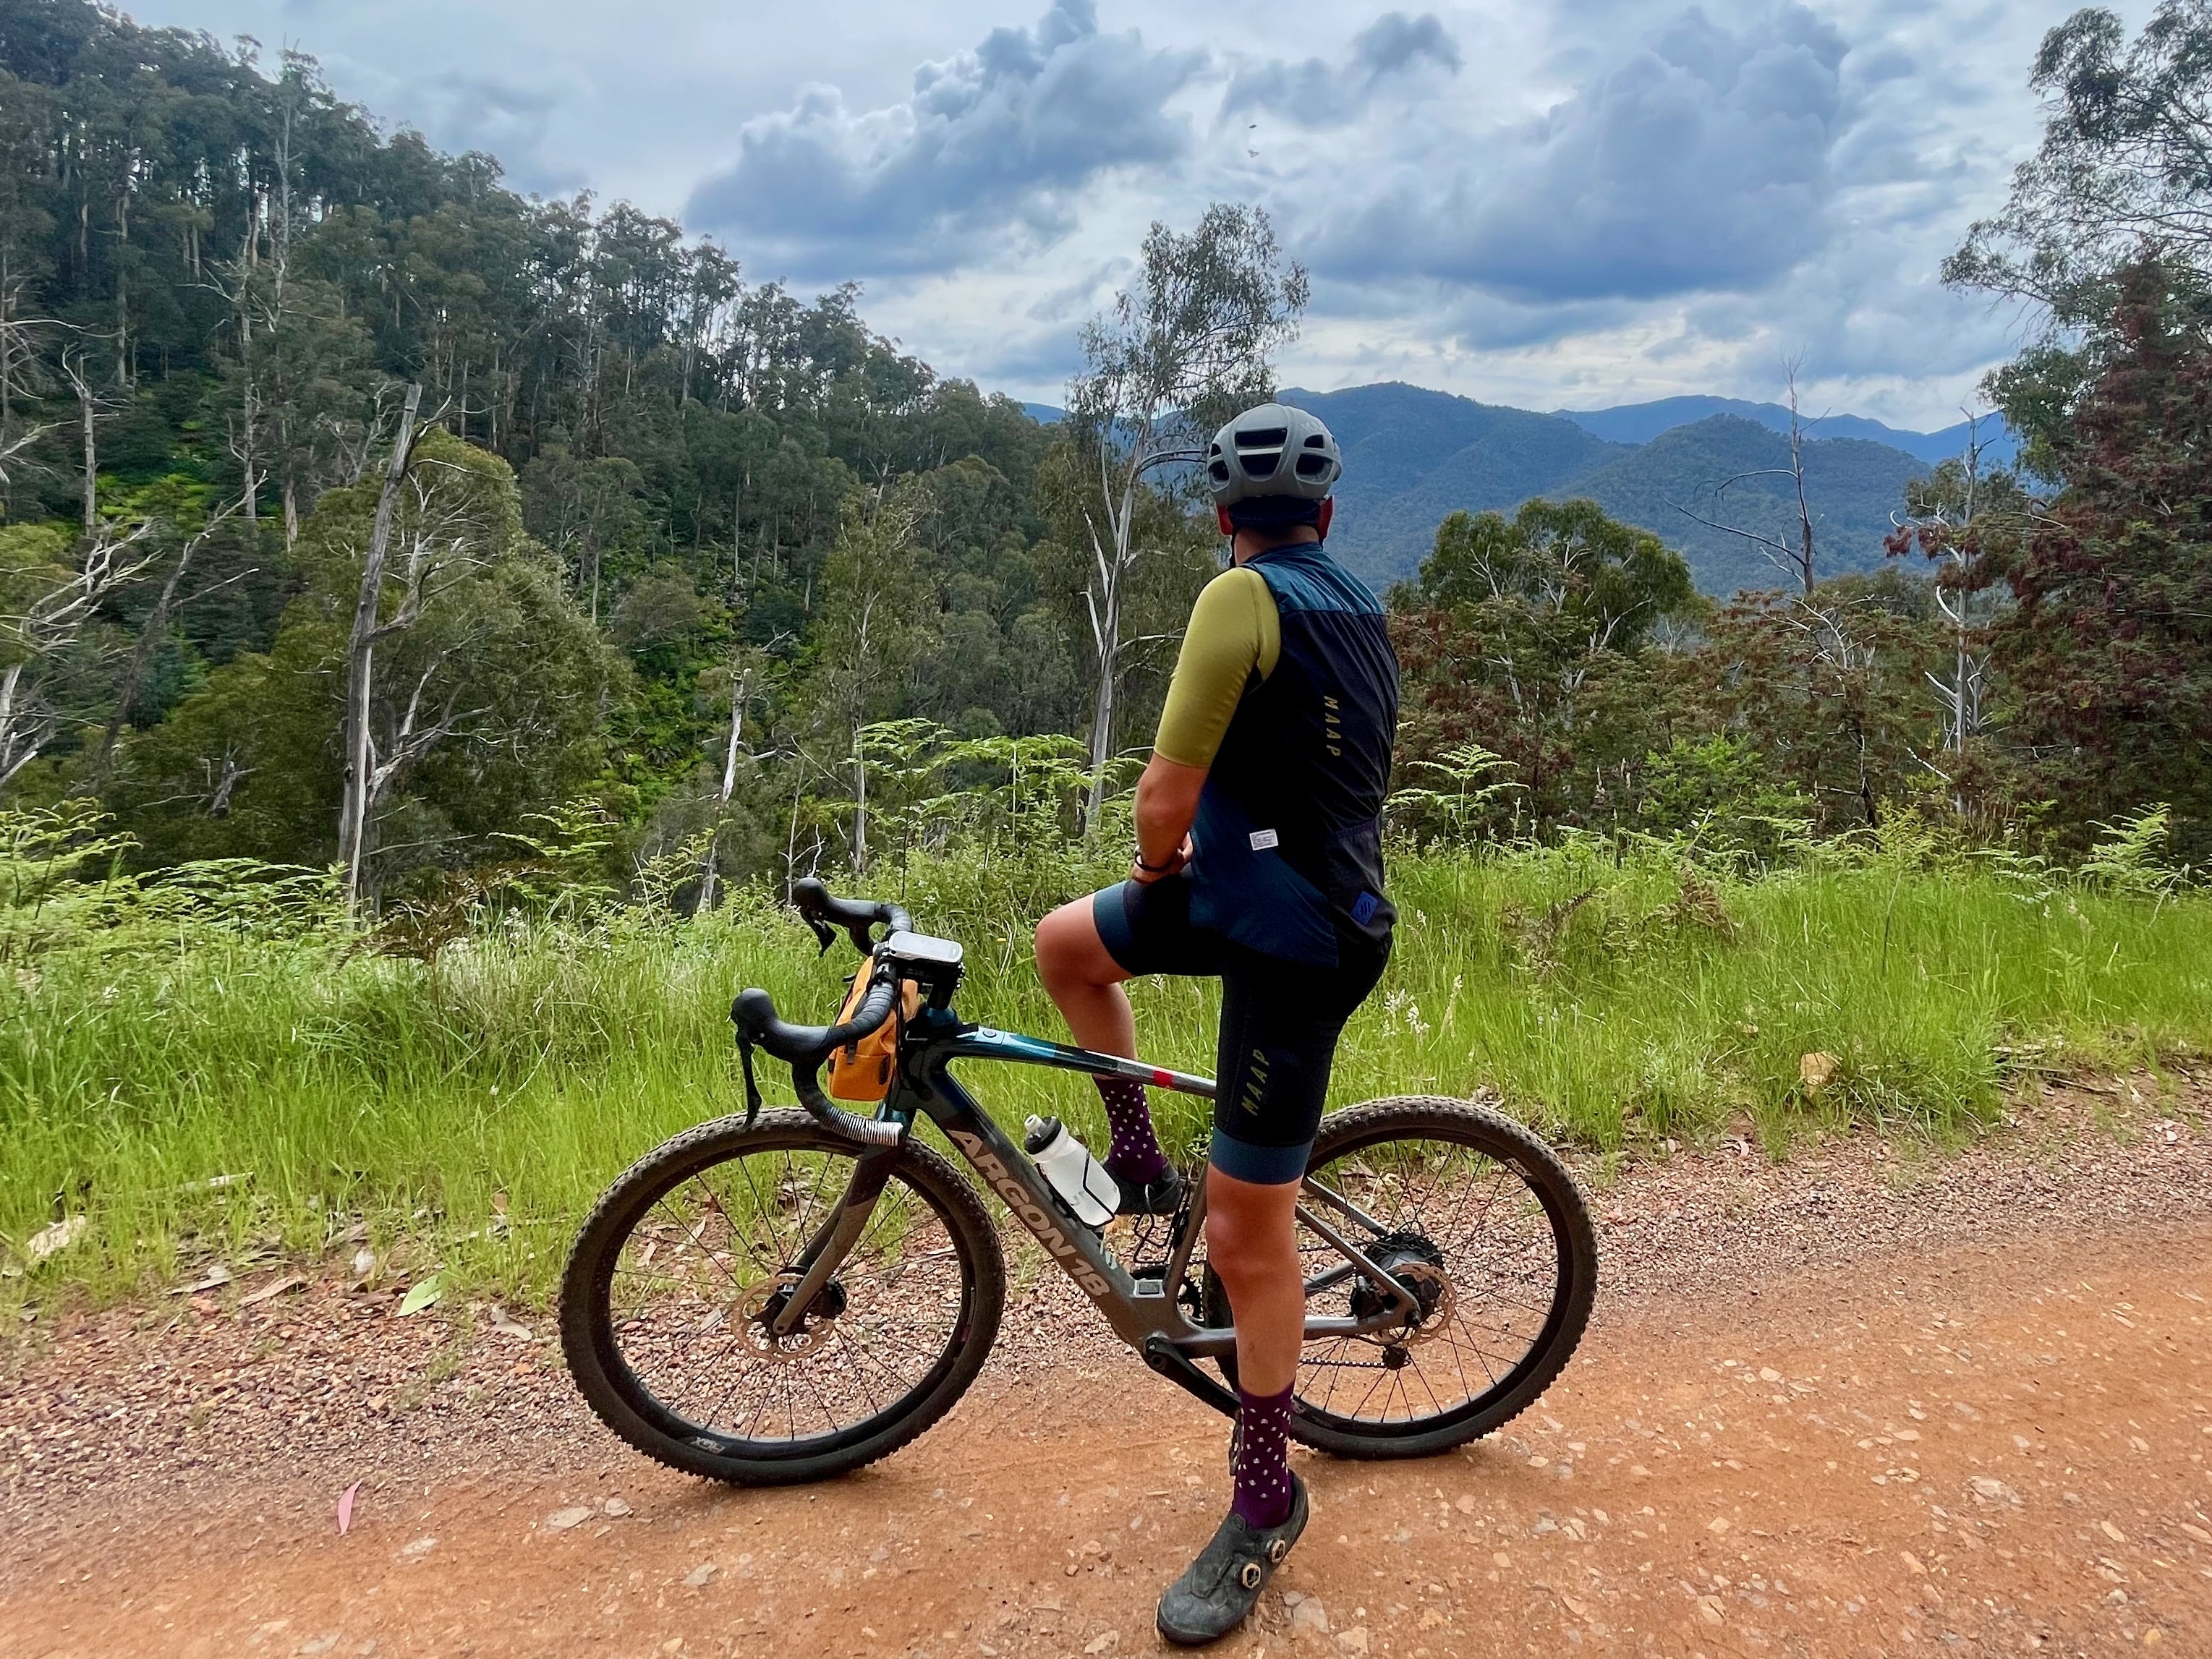 A cyclist stopped on a smooth dirt road looking at the view of surrounding native bushland covered mountains and valleys